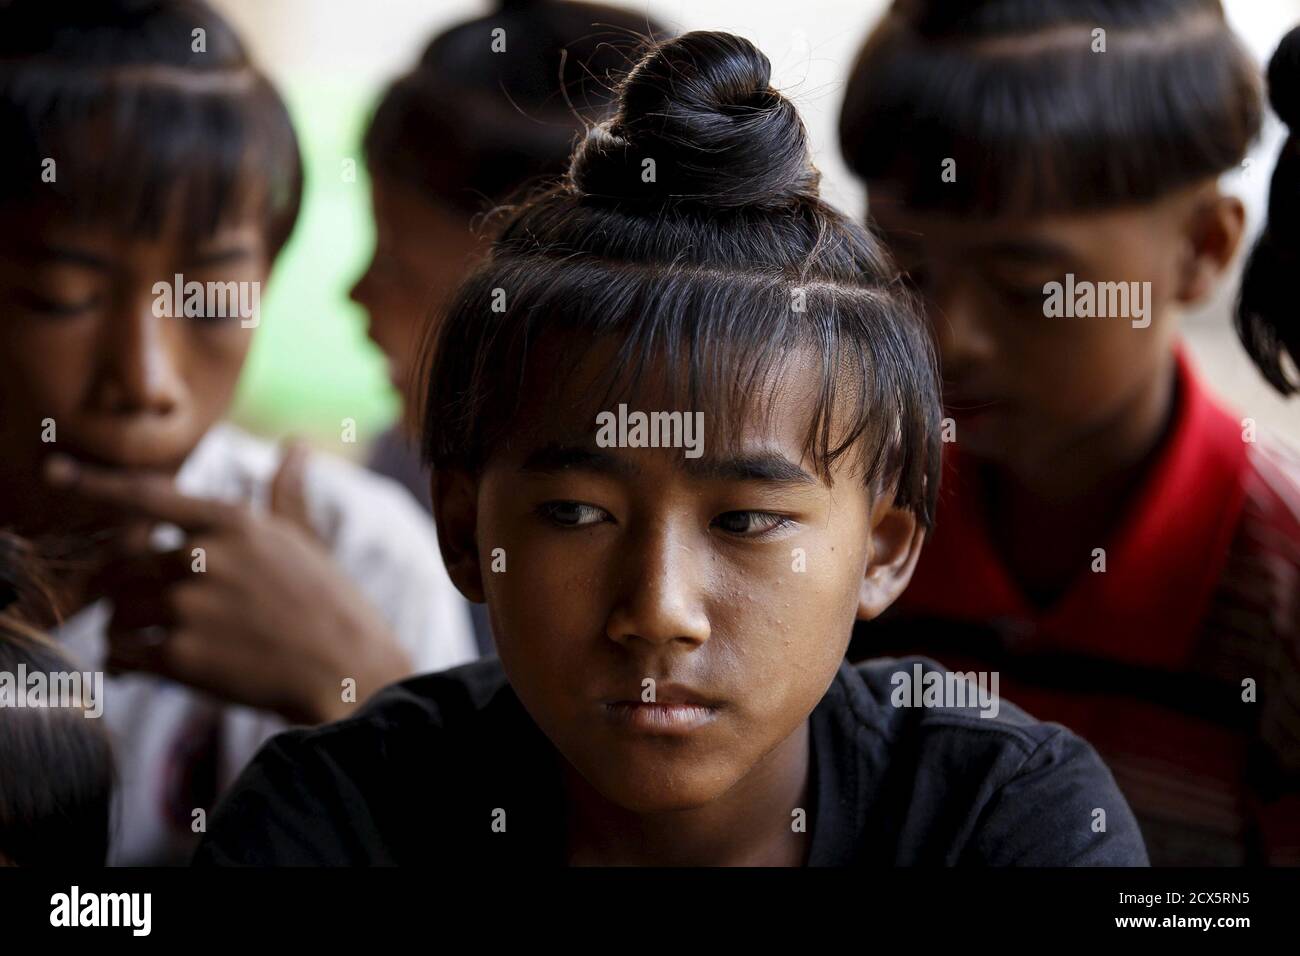 Zaw Myo Aung (C), 13, sits with others boys who all sport the ancient  hairstyle known as Sanyitwine in a monastery at Sat Sat Yo village in  Nyaung Oo township, near Myanmar's